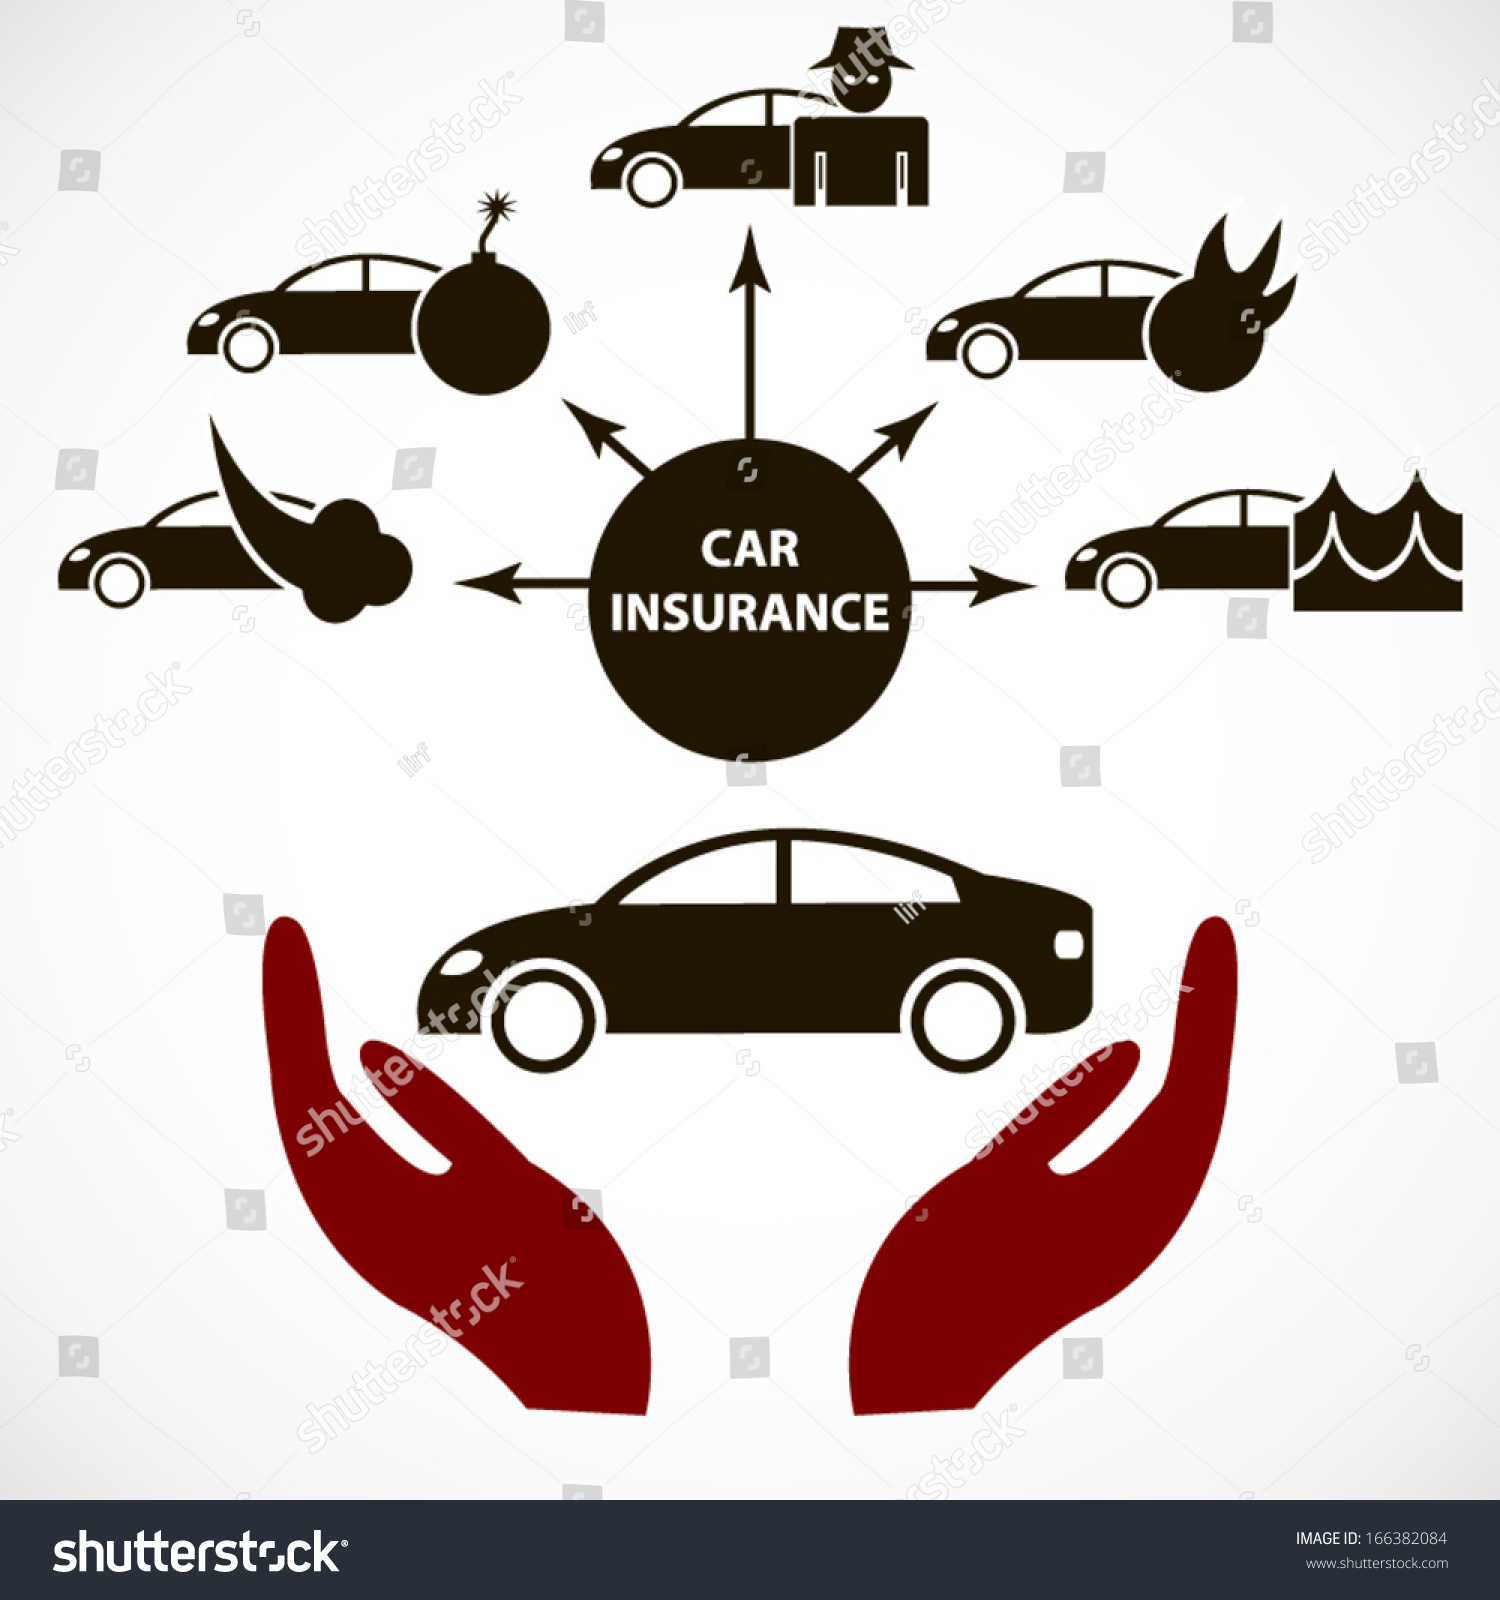 Car Insurance Modern Realistic Poster Background Stock inside dimensions 1500 X 1600